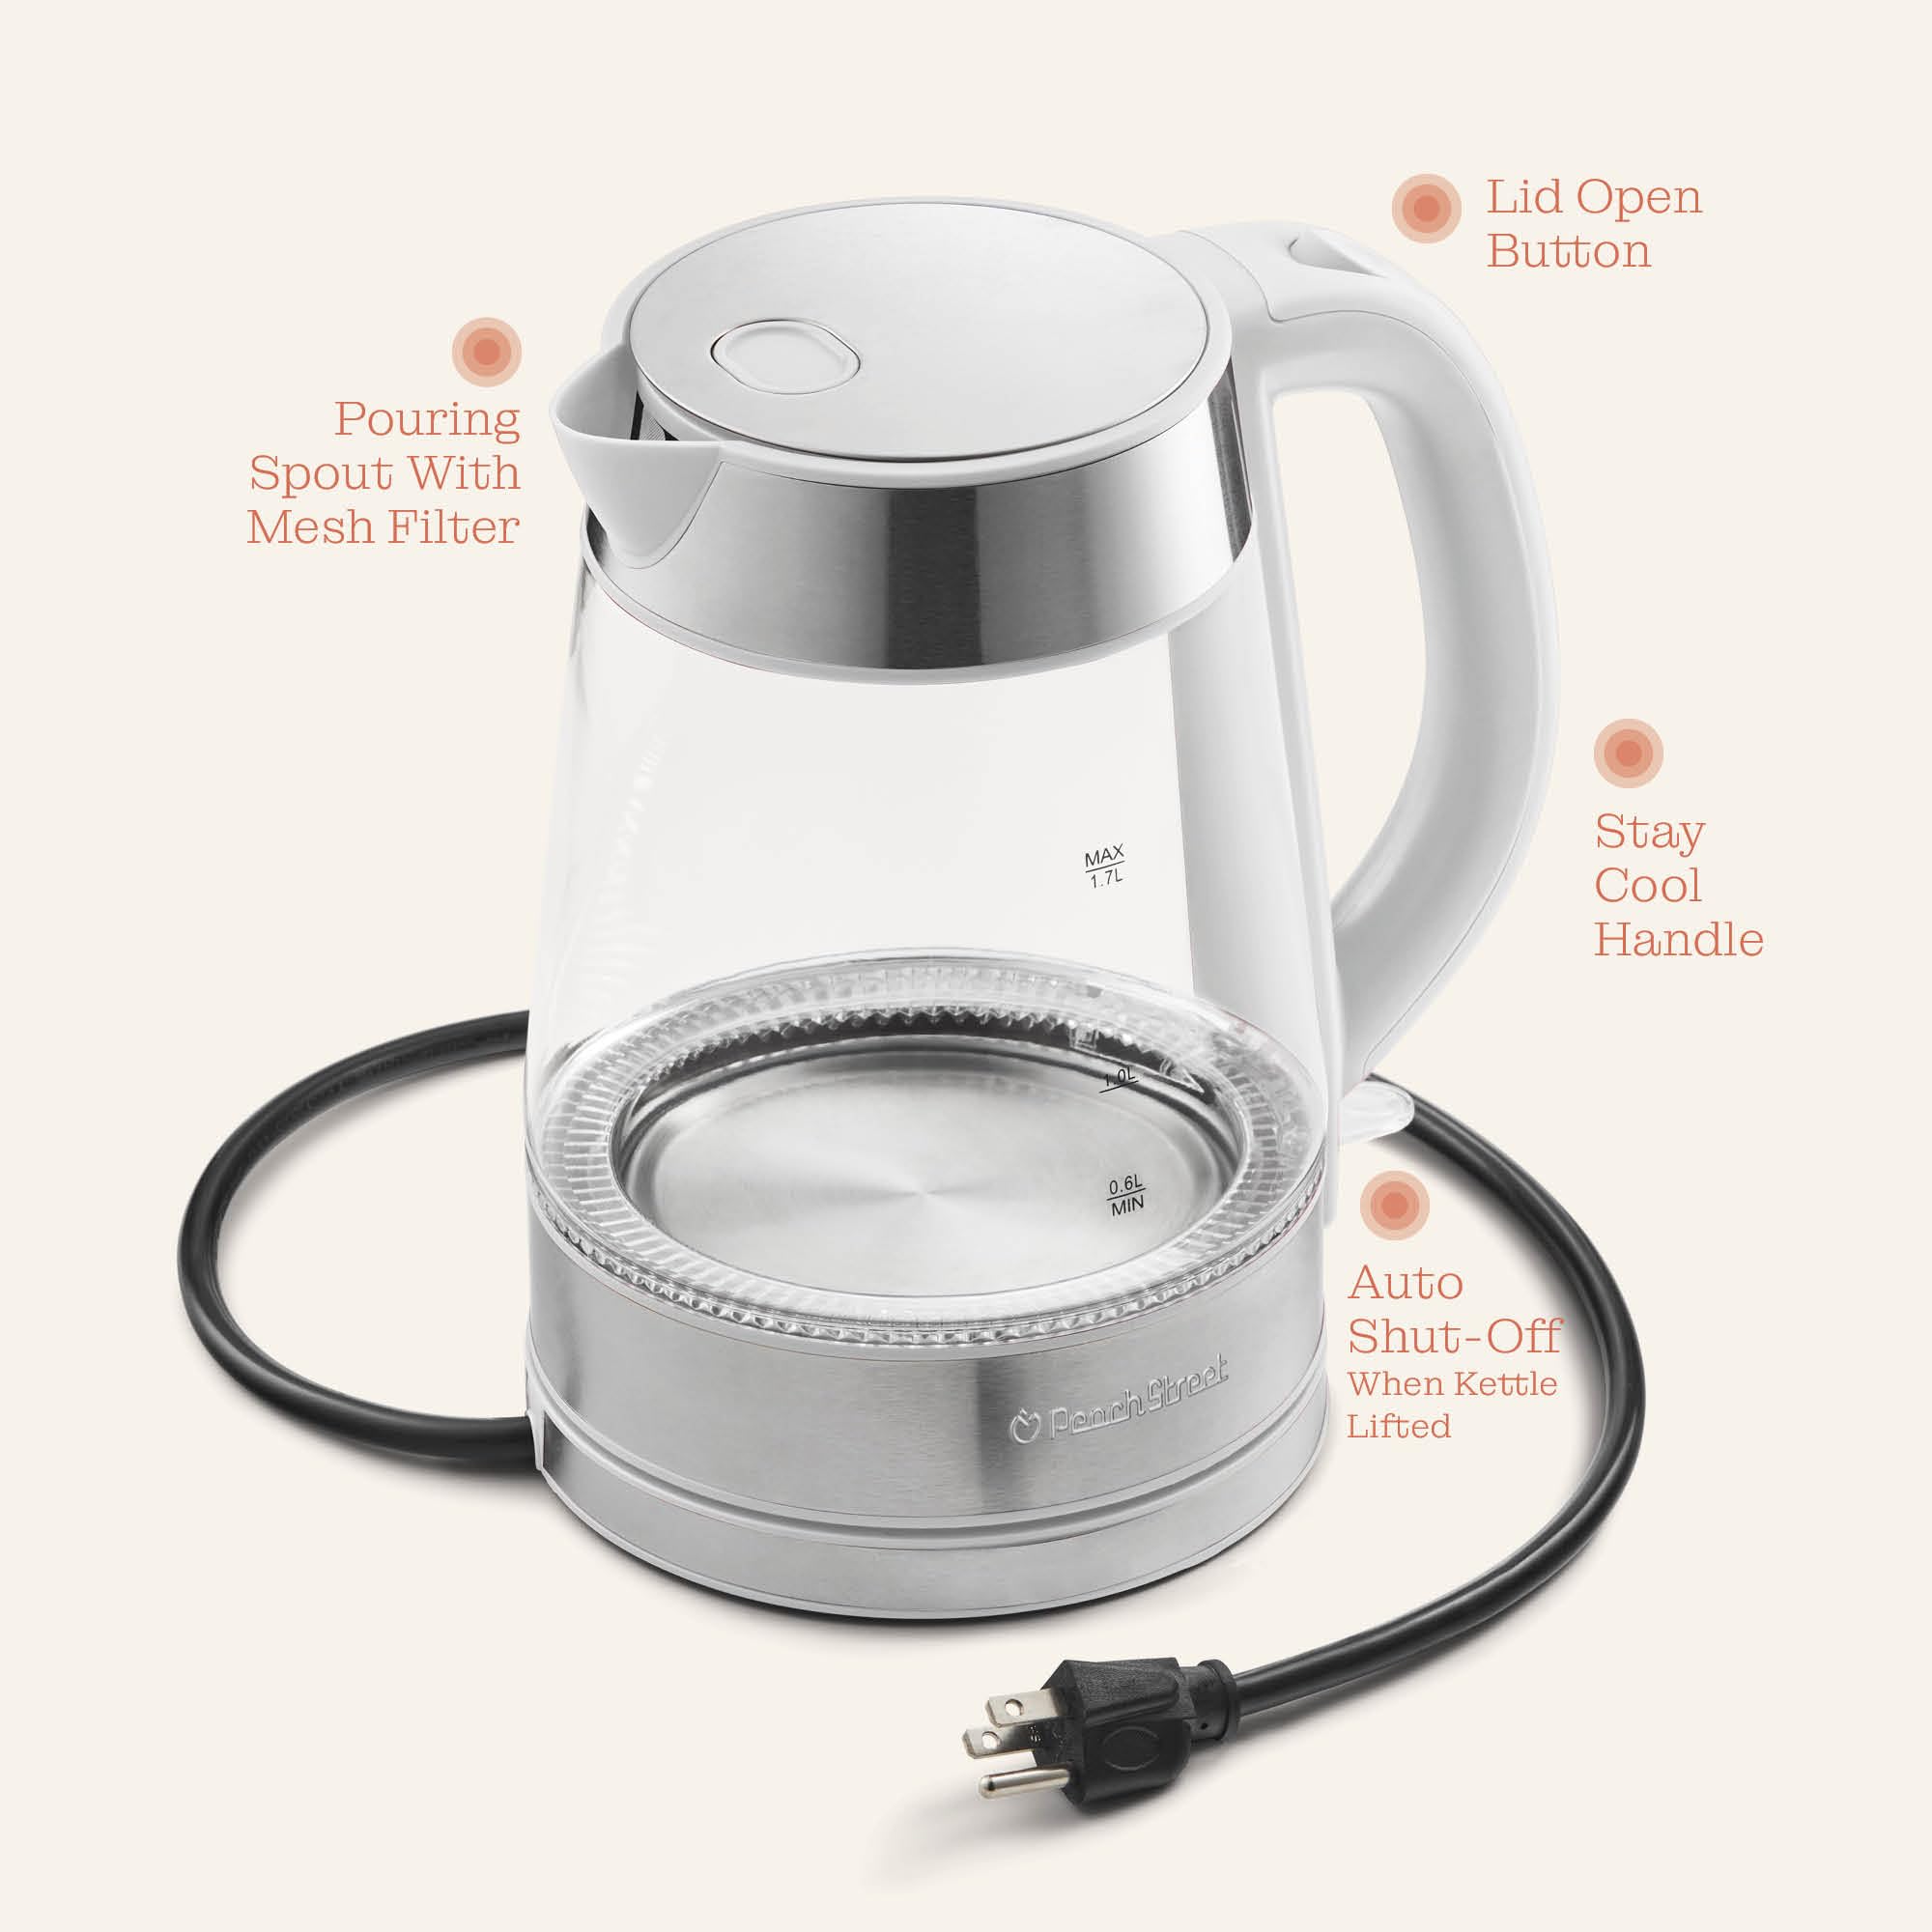 Speed-Boil Water Electric Kettle, 1.7L 1500W, Coffee & Tea Kettle Borosilicate Glass, Water Boiler, Auto Shut-Off, Cool Touch Handle, Base Detachable, LED. 360� Rotation, Boil Dry Protection (White)  - Acceptable